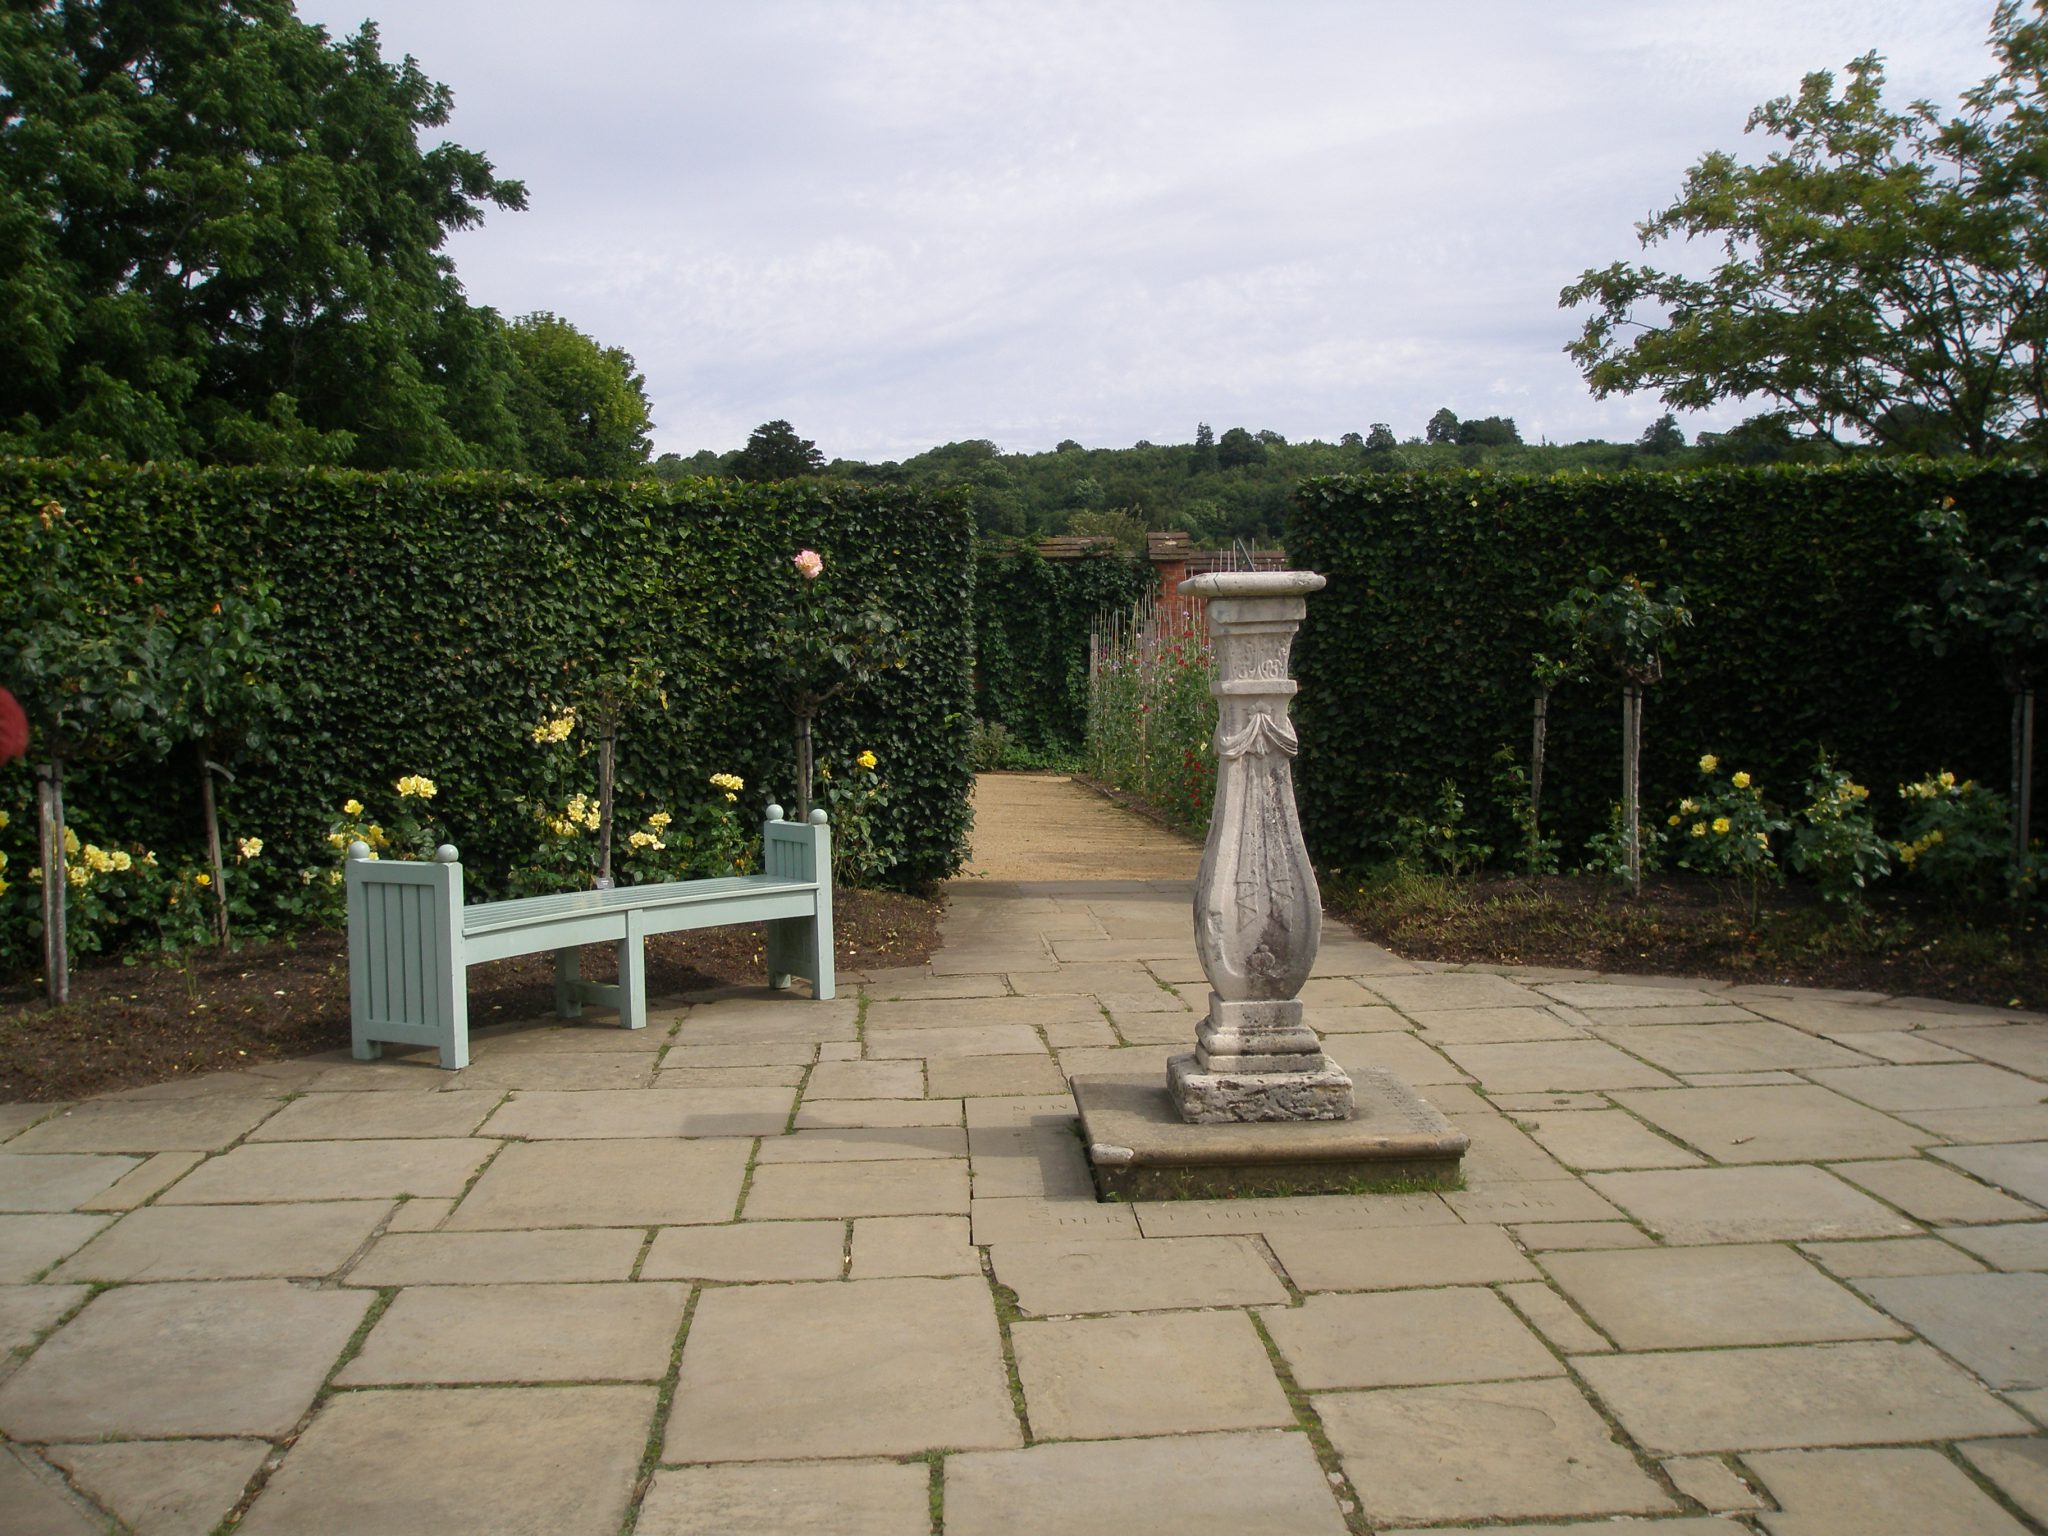 Midway along the Golden Rose Avenue is a circular terrace with a sundial. Below the sundial is buried a pet dove that Clementine brought home from a cruise to Bali in 1935. The dove survived for 2 or 3 years at Chartwell. Chartwell's gardens are full of personal touches.